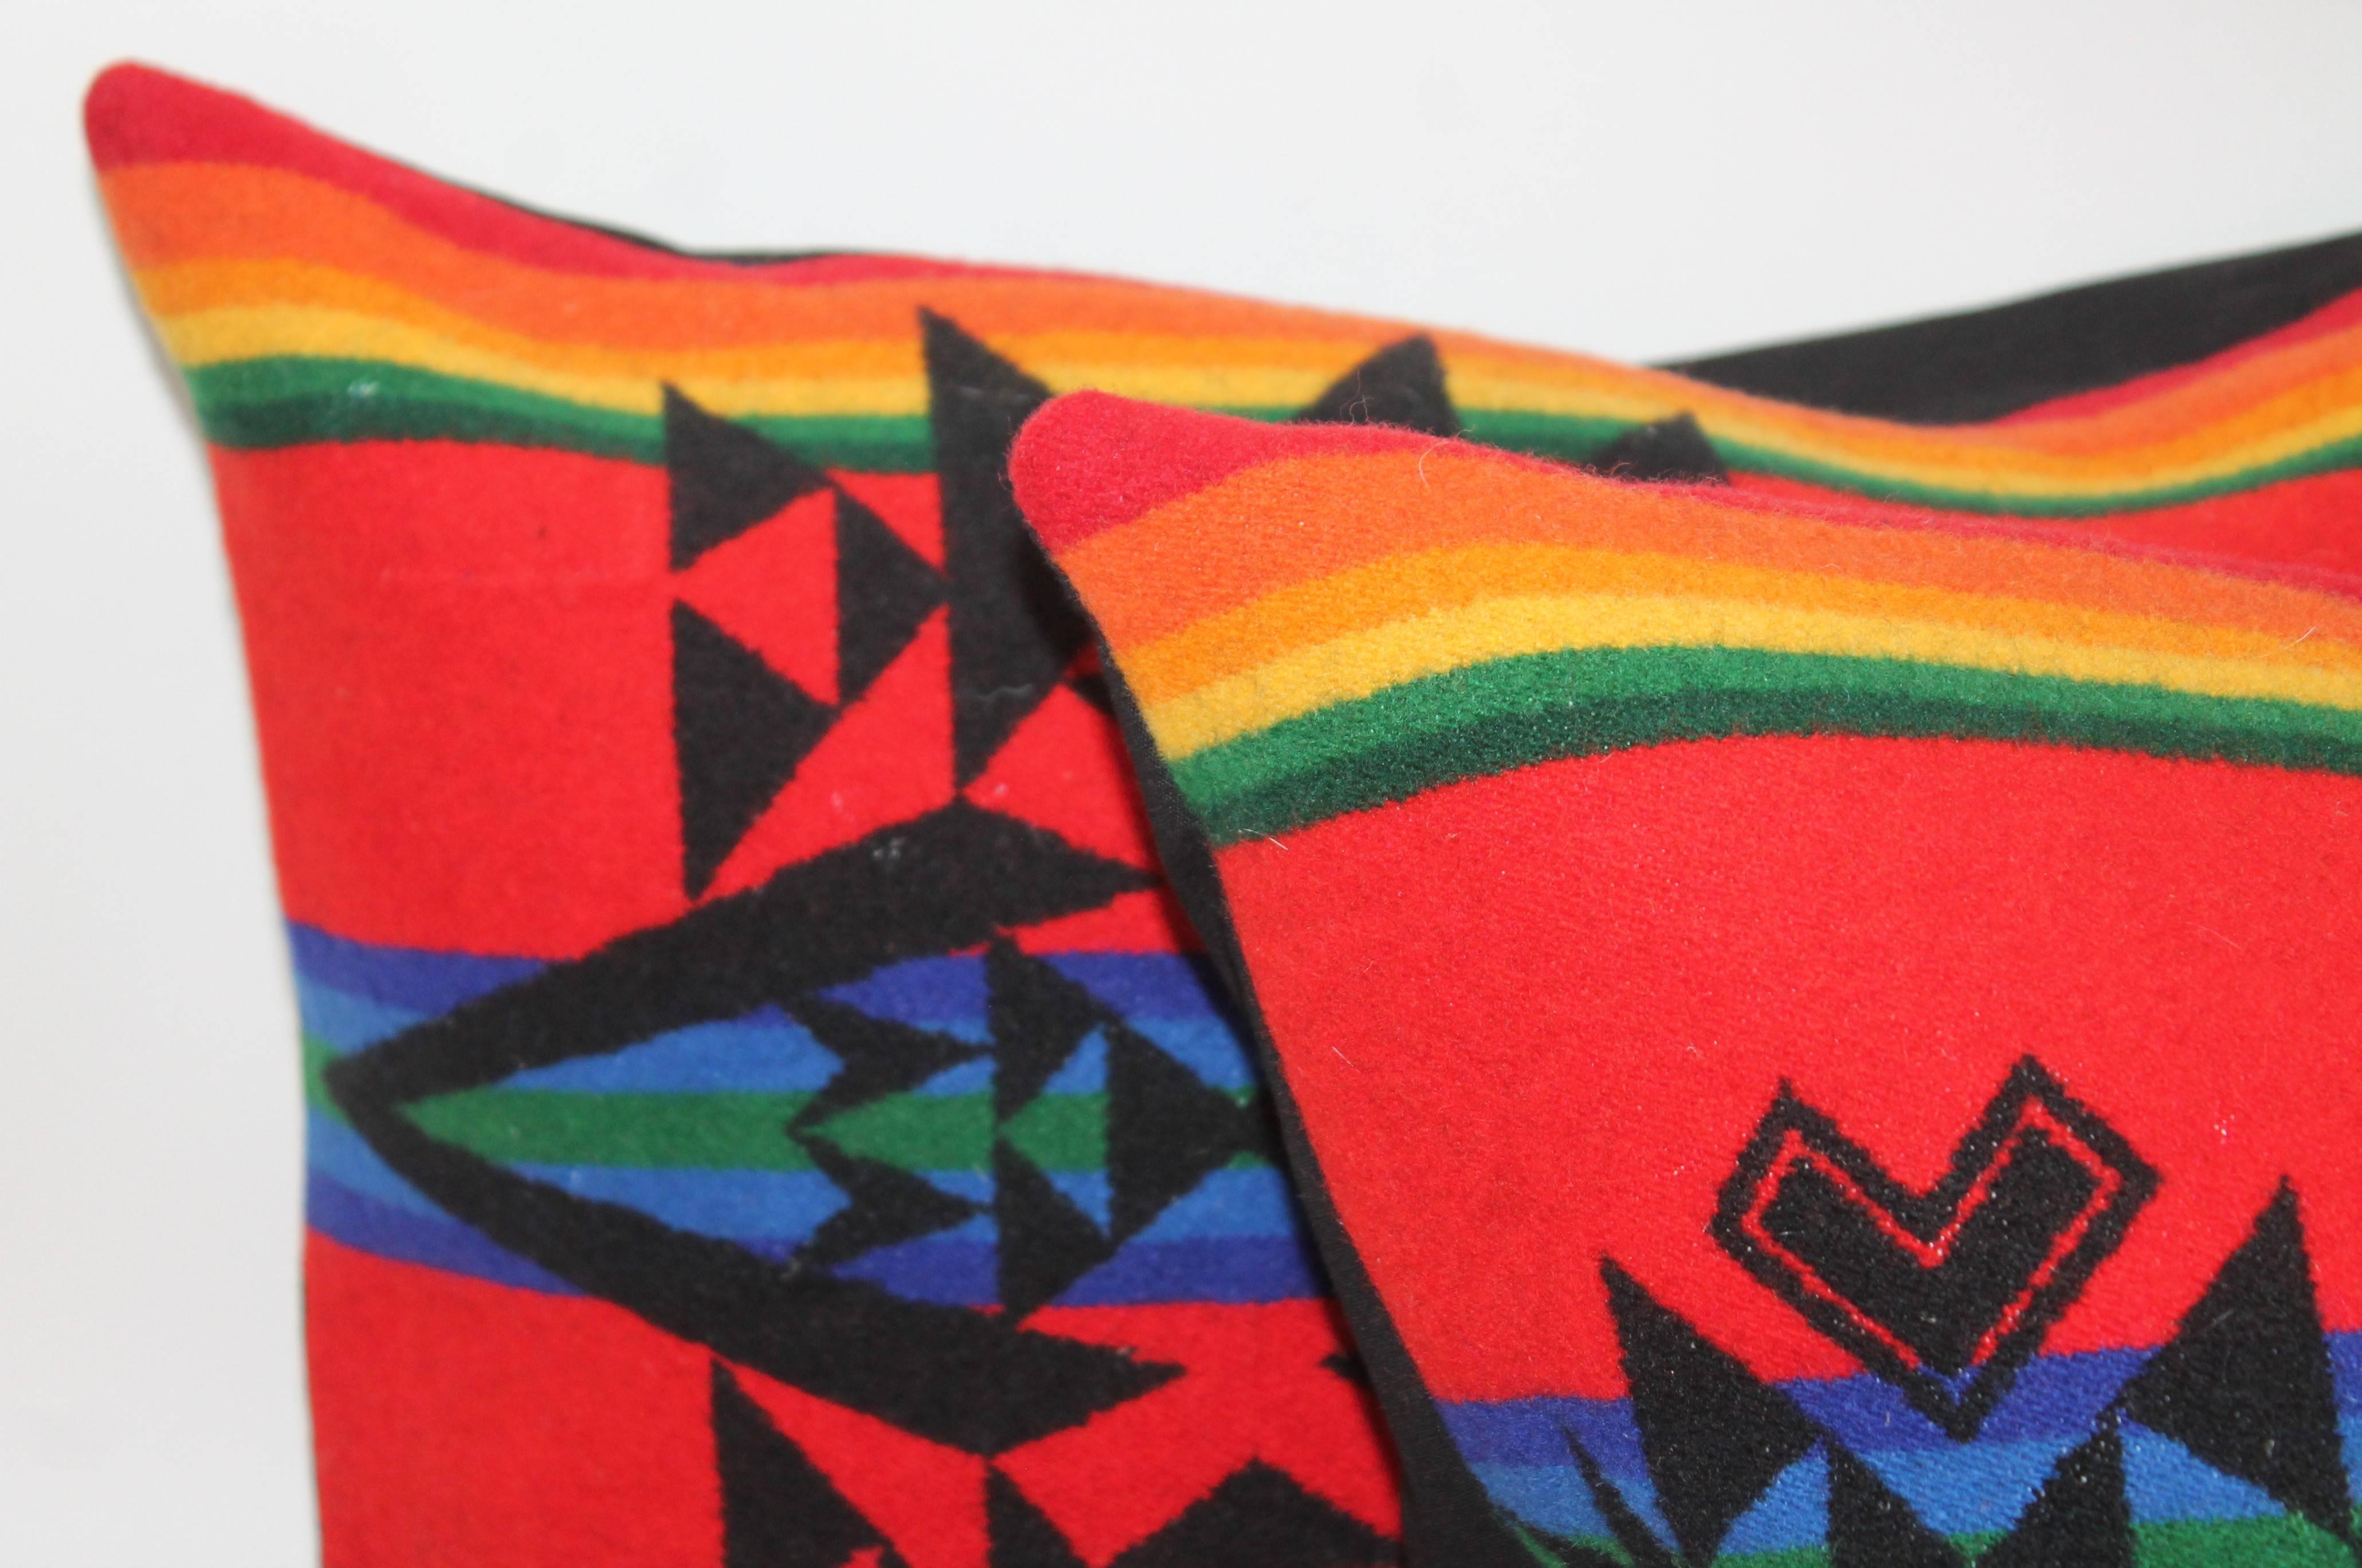 These fine and colorful Indian design camp blanket pillows are newly made from vintage Pendleton blankets. The condition is very good. The backing is in black linen.